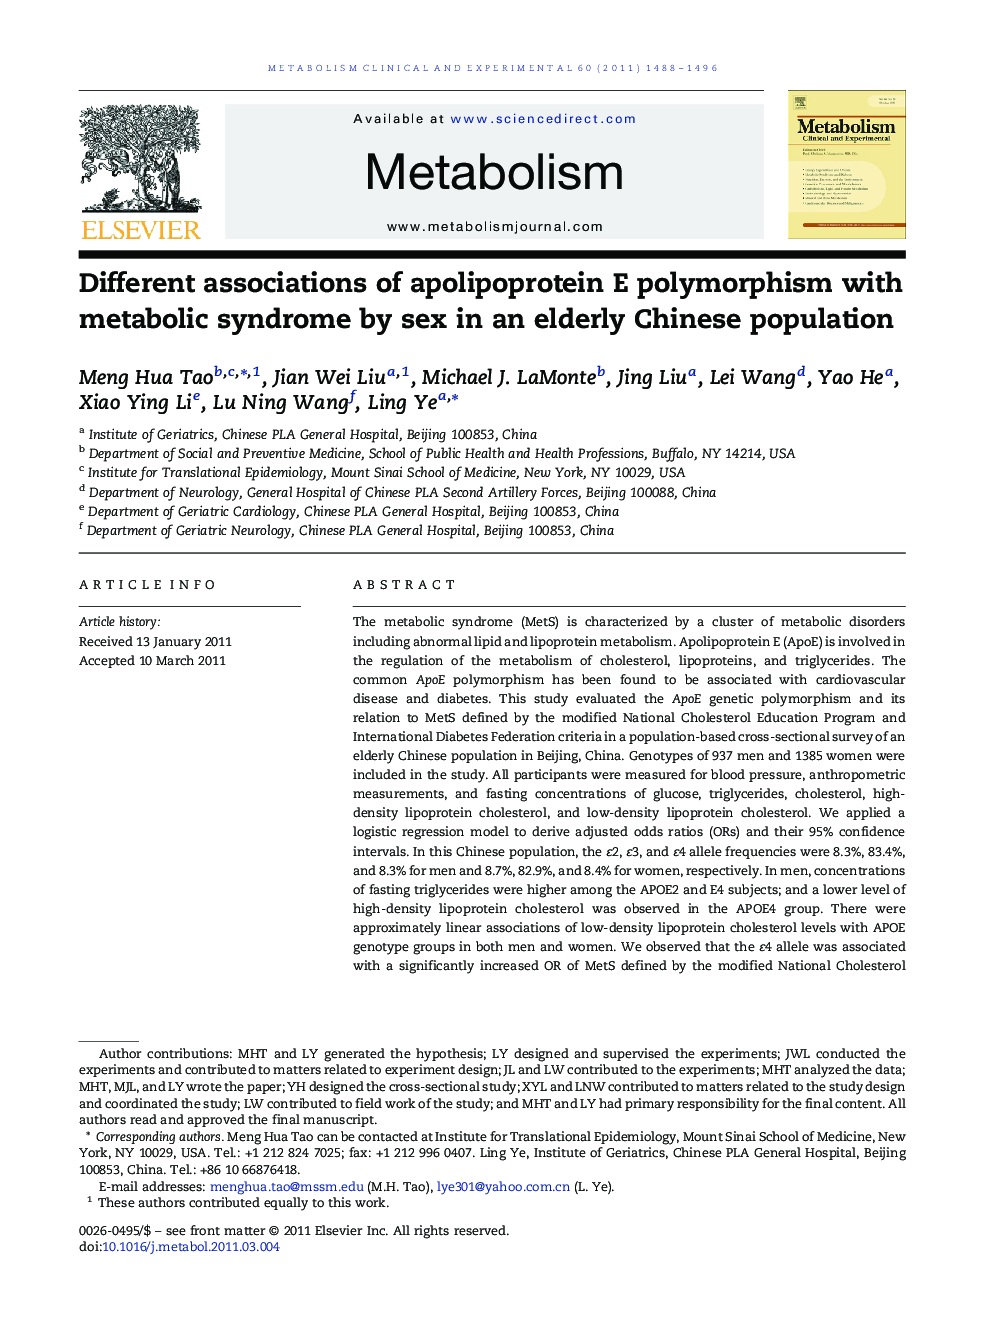 Different associations of apolipoprotein E polymorphism with metabolic syndrome by sex in an elderly Chinese population